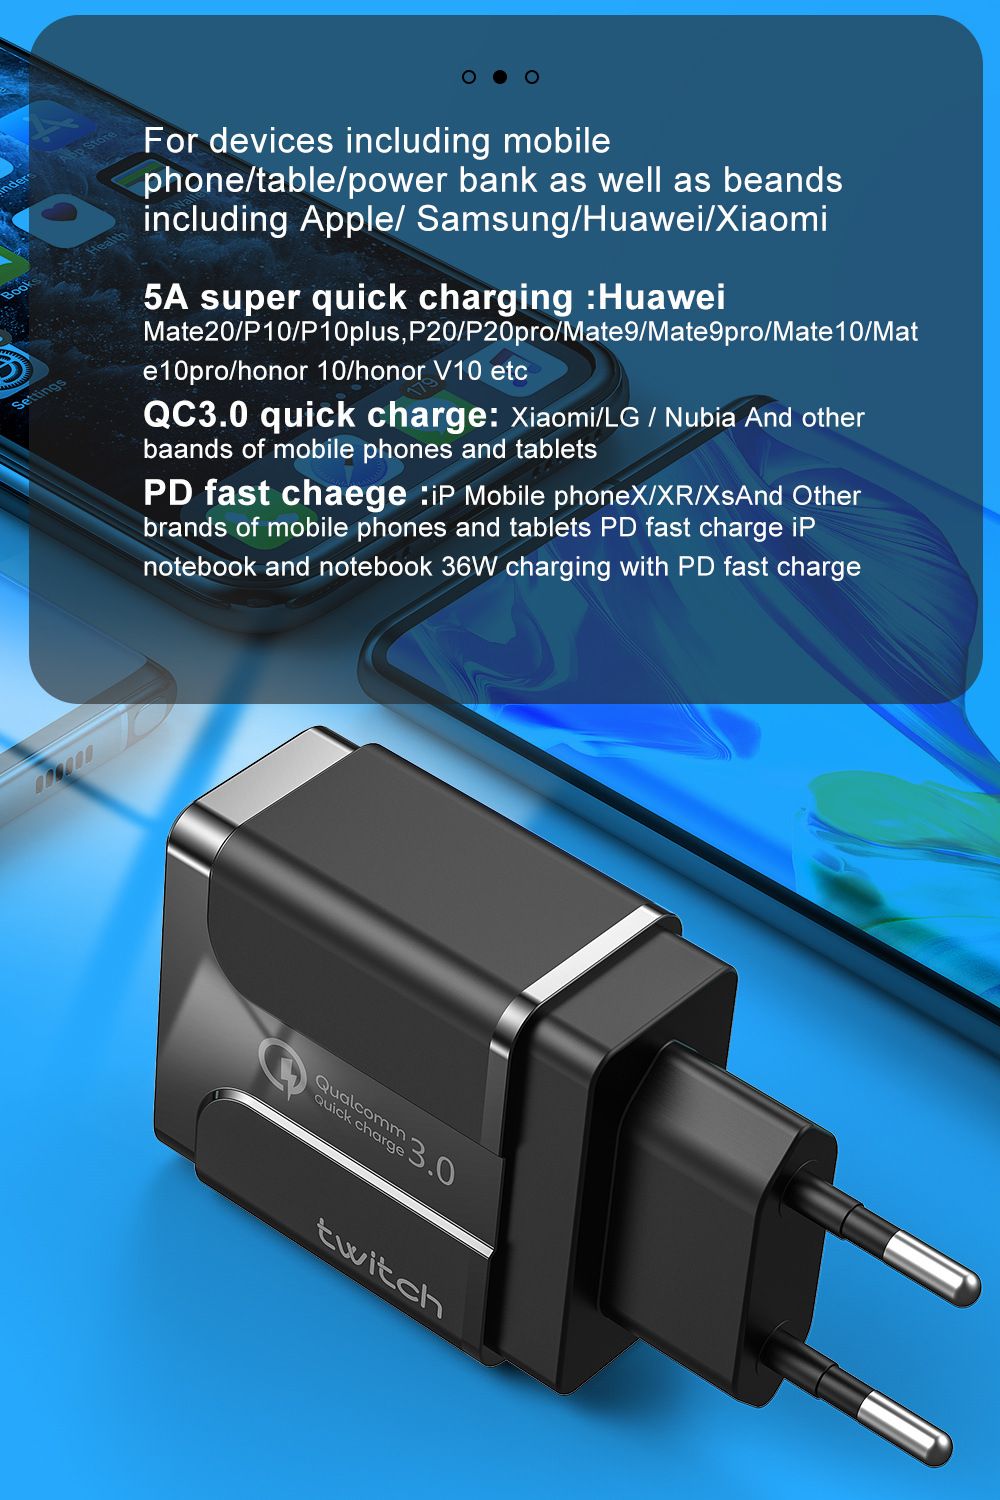 Twitch-Type-C-USB-Charger-36W-QC30-PD-Fast-Charging-For-iPhone-XS-11Pro-Huawei-P30-Pro-Mate-30-Mi10--1666588